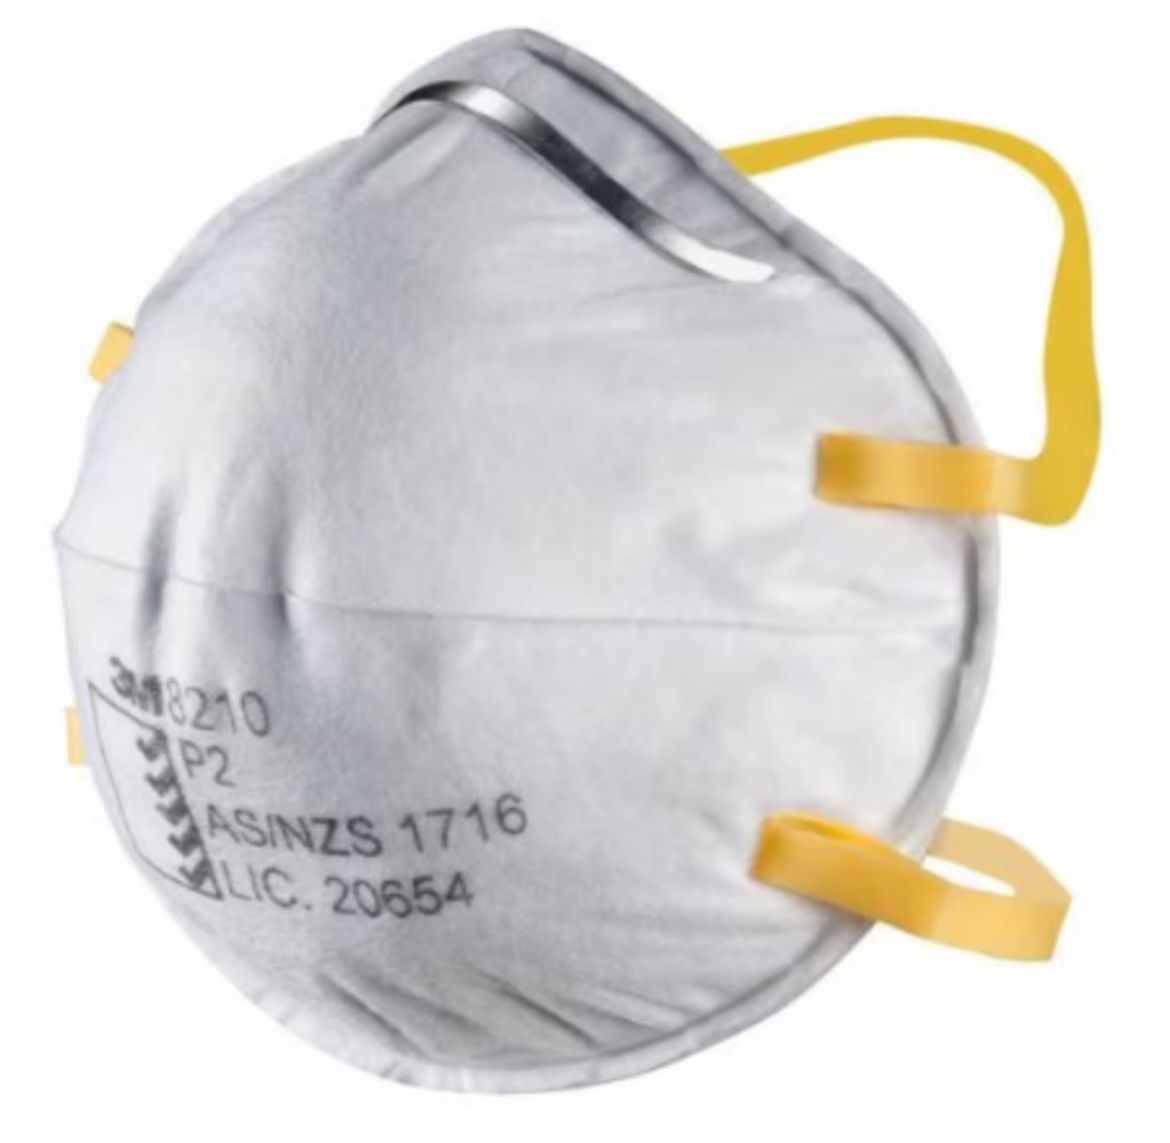 Picture of 8210 P2 CUPPED PARTICULATE RESPIRATOR